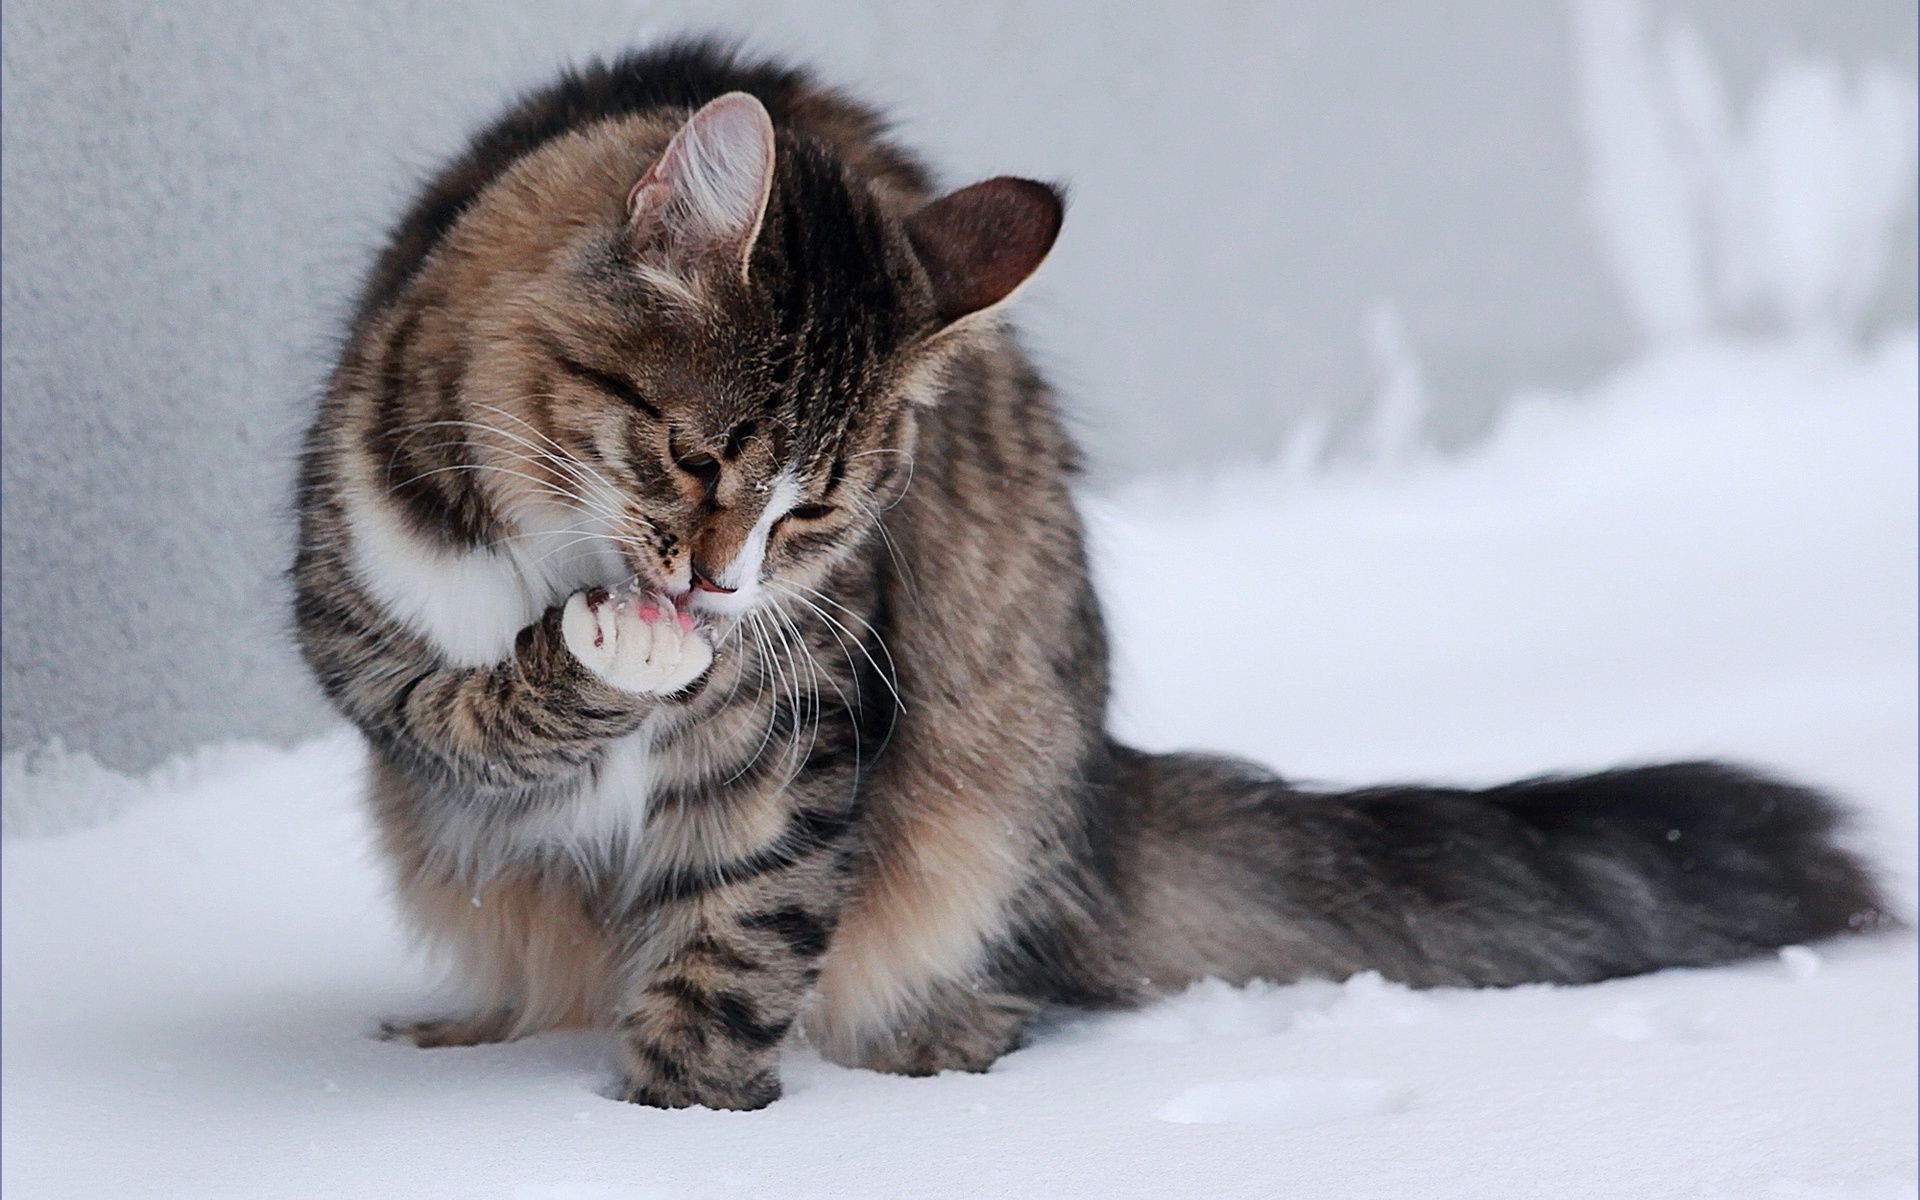 Kitty licks paw in the snow . Desktop wallpapers for free.